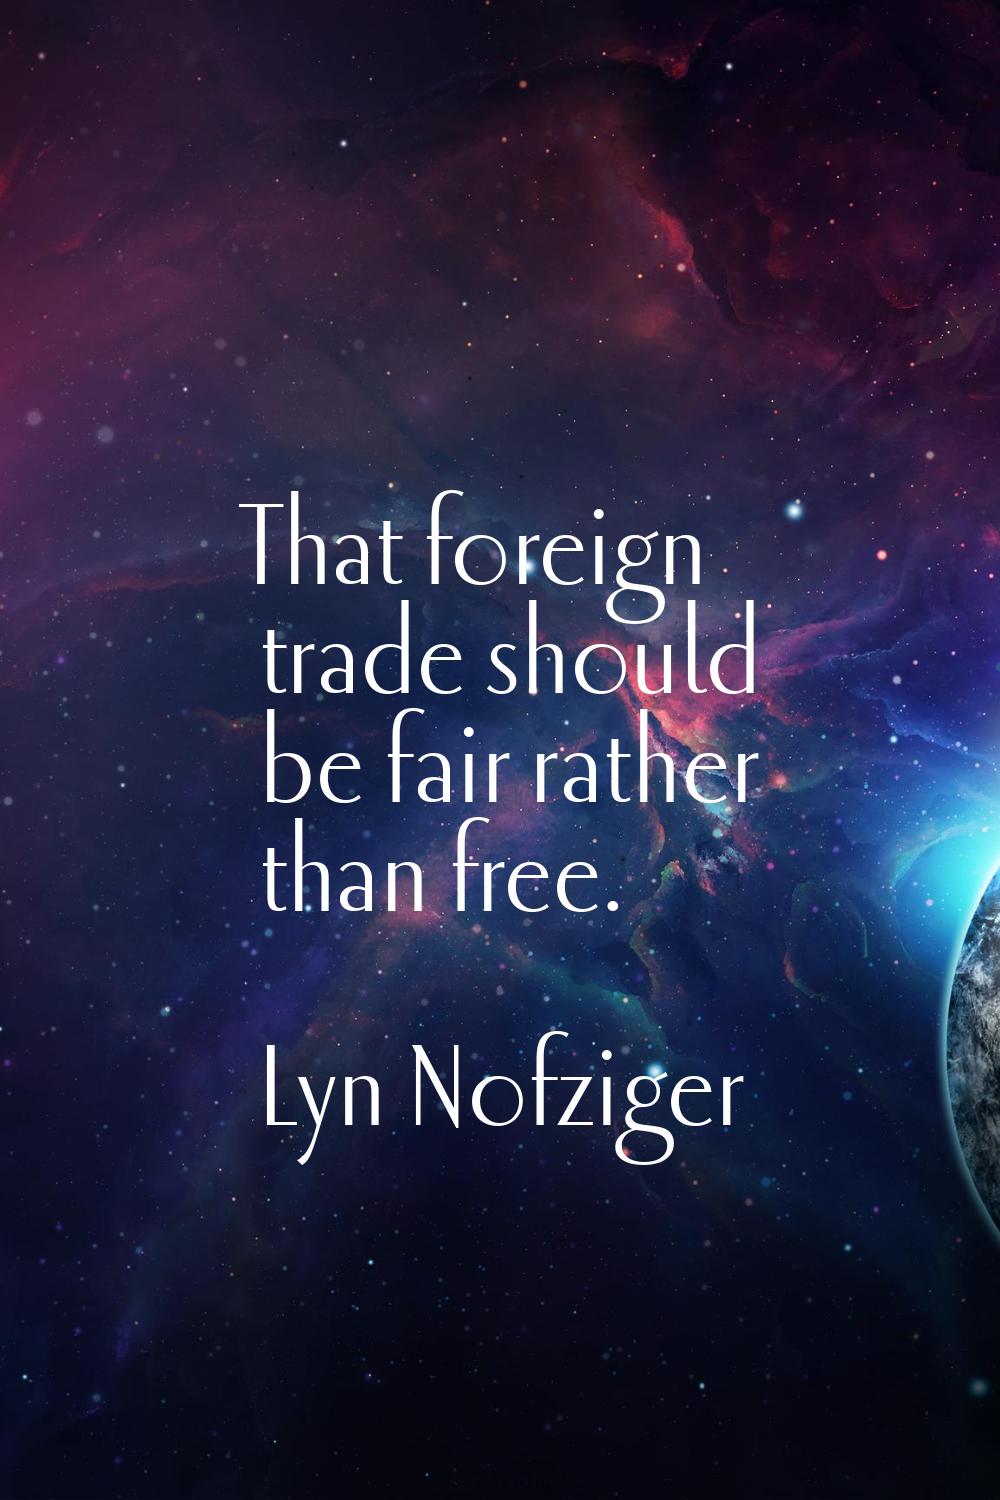 That foreign trade should be fair rather than free.